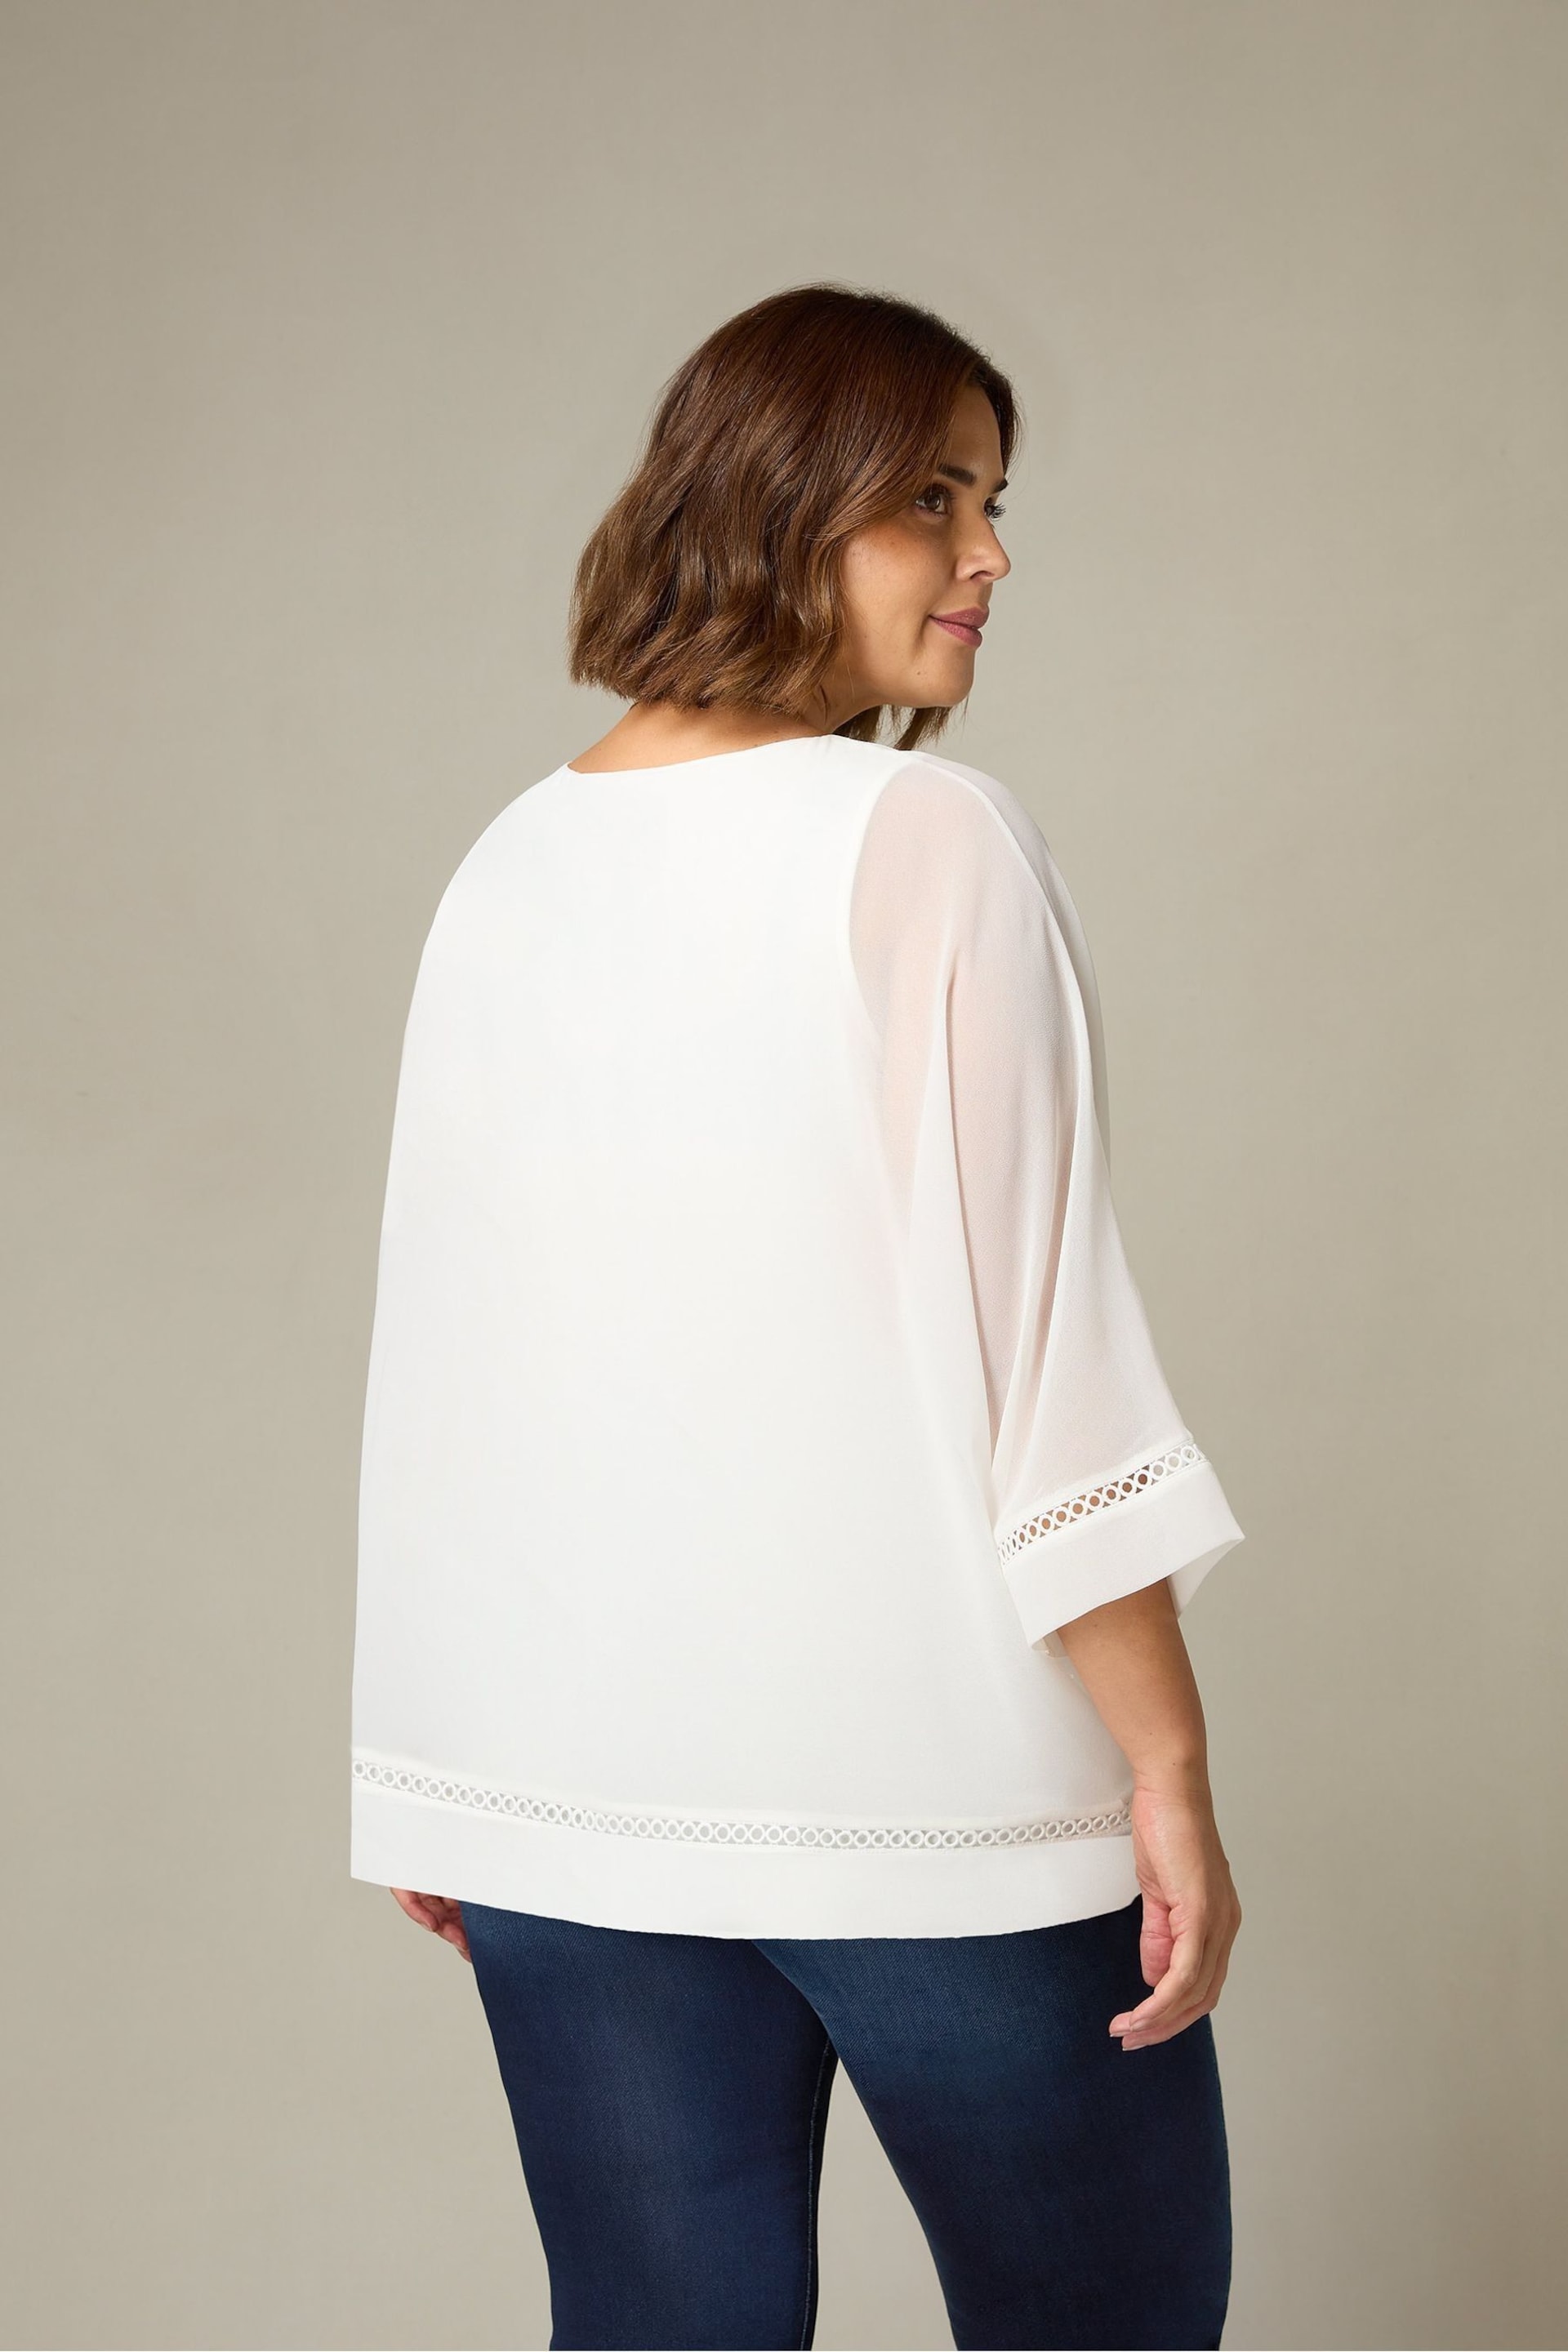 Live Unlimited Curve Chiffon Trim Insert Overlay White Top - Image 2 of 4